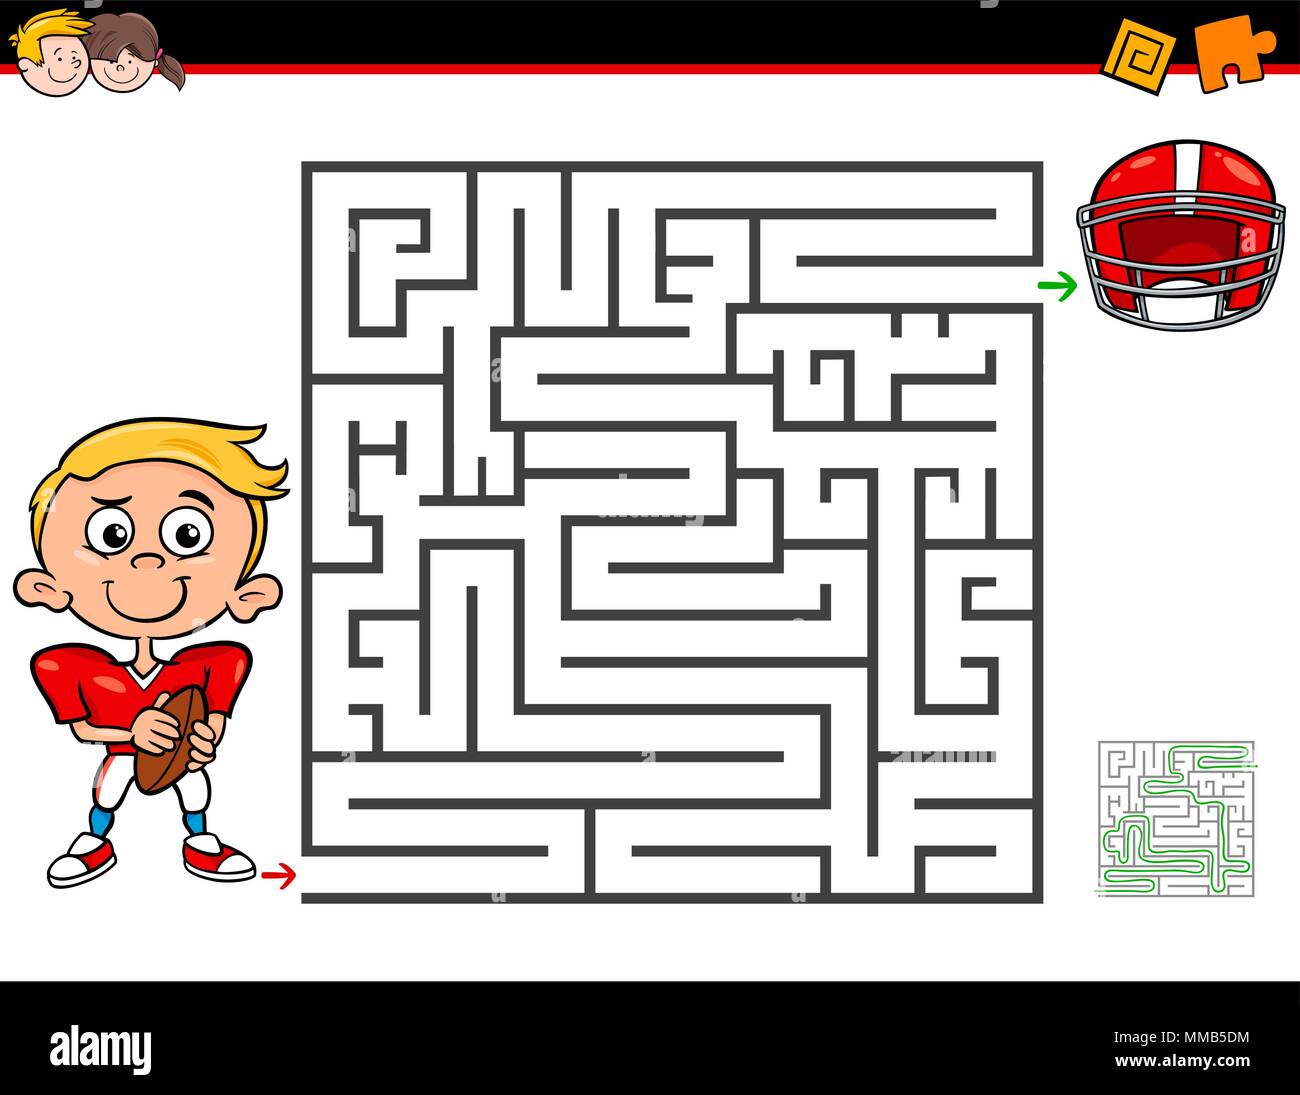 Cartoon Illustration of Education Maze or Labyrinth Activity Game for Children with Little Boy and Football Stock Vector